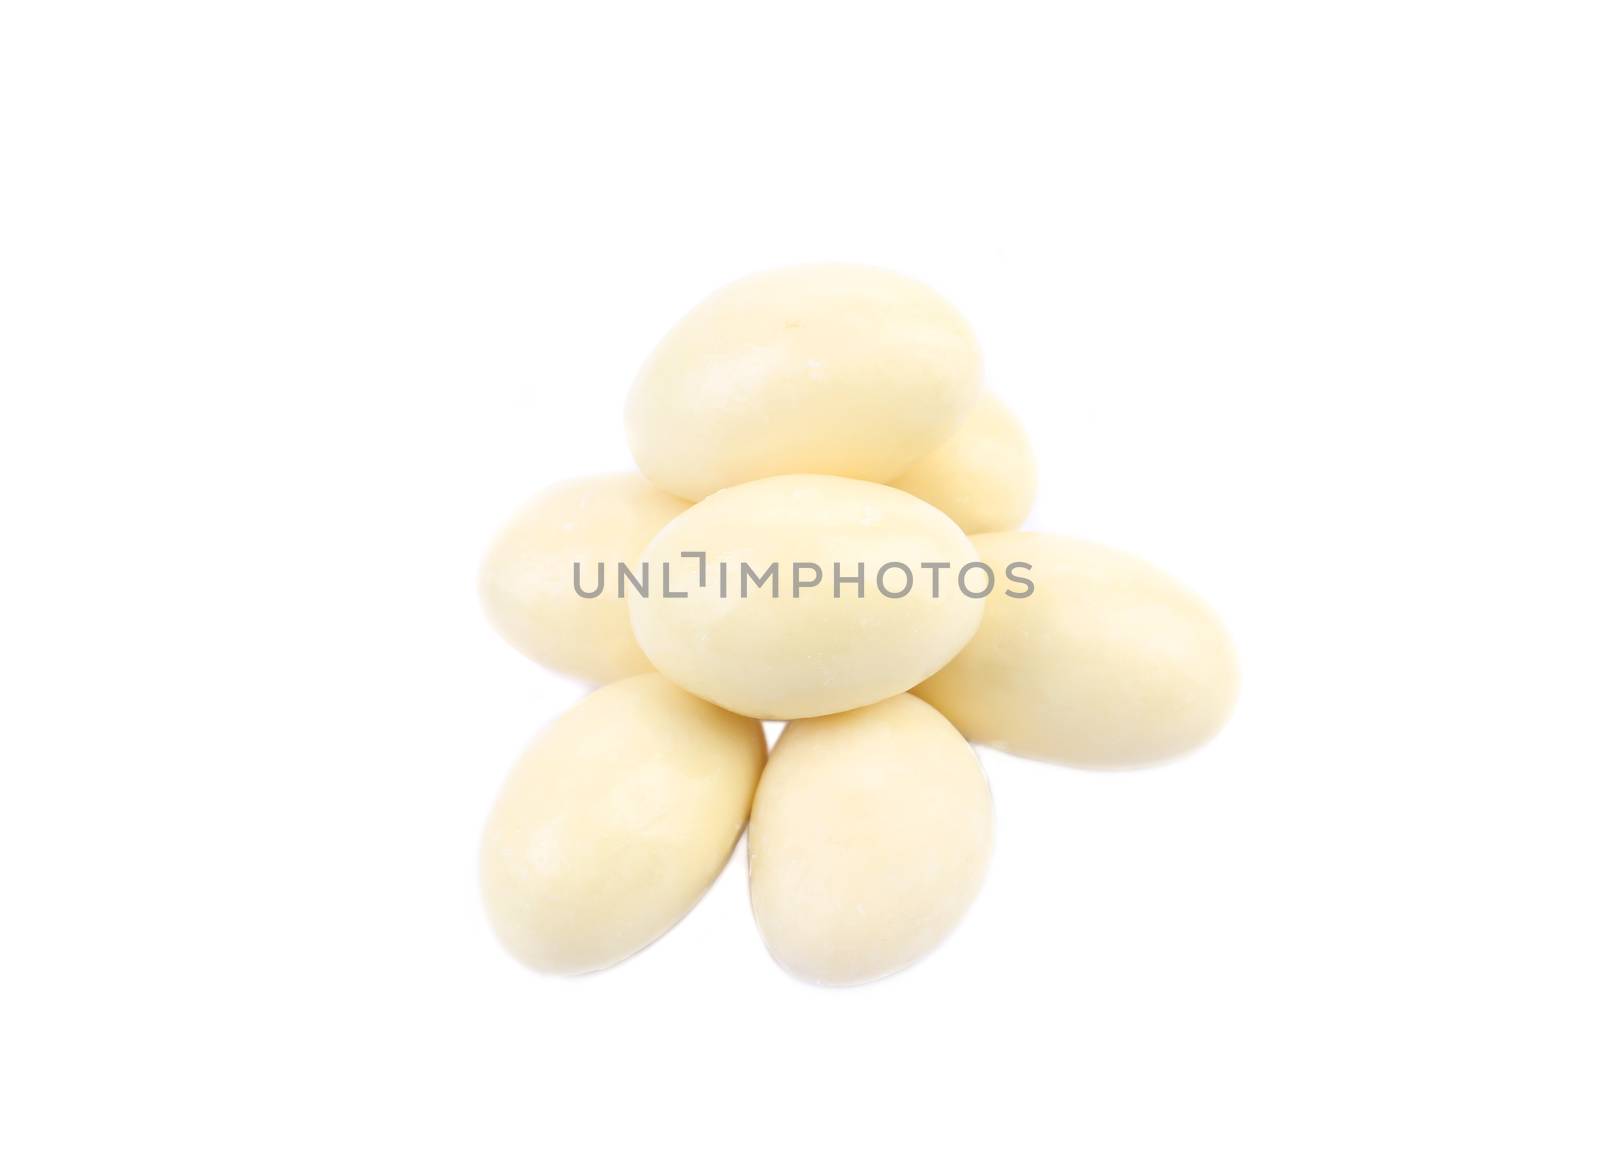 Pill of white chocolate dragee. Isolated on a white background.